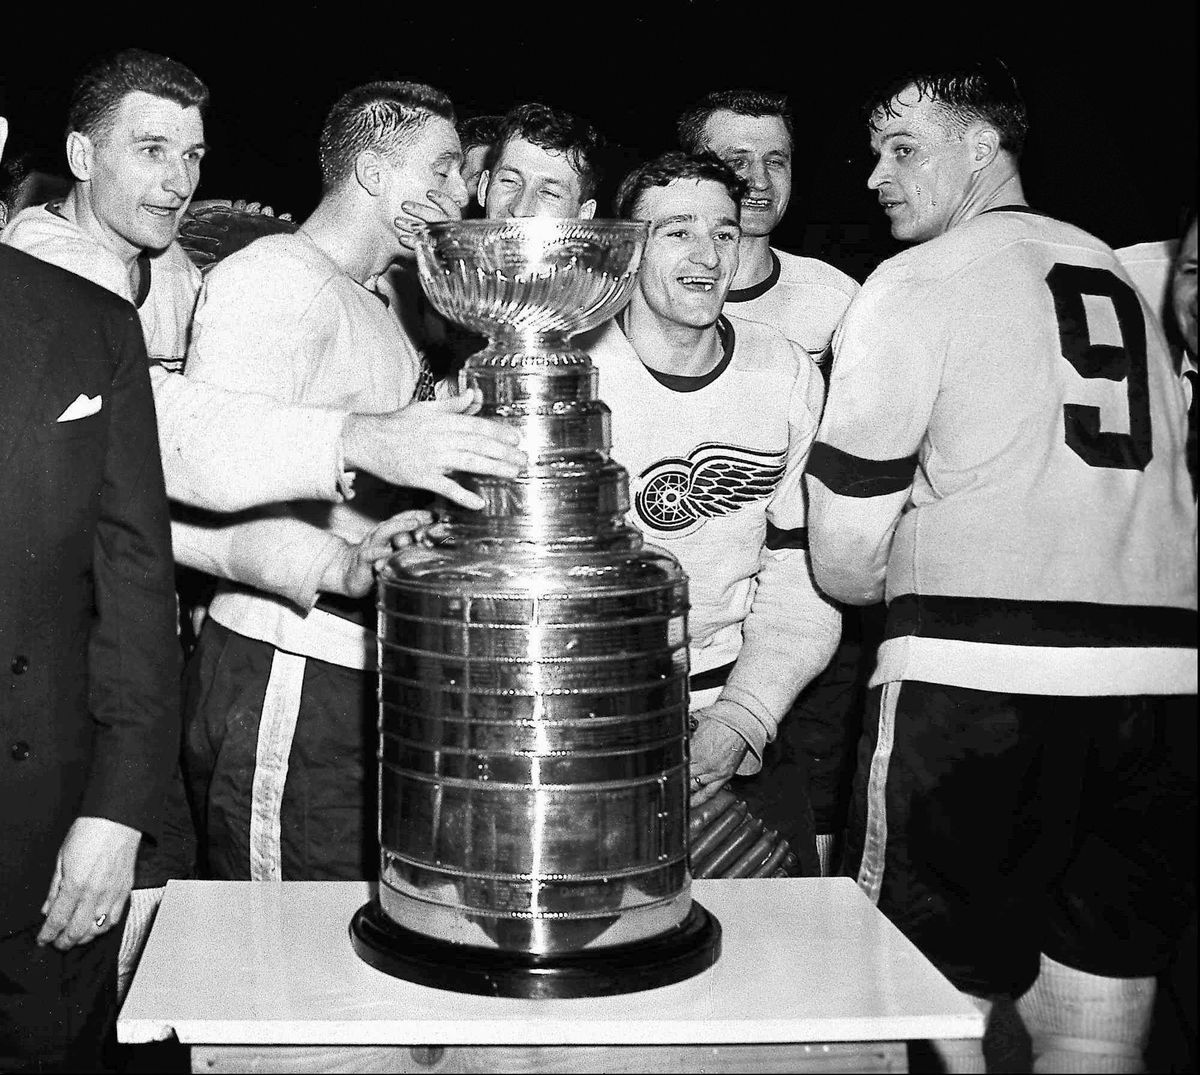 In this April 14, 1955, file photo, the Detroit Red Wings, including Gordie Howe, right, surround the Stanley Cup after beating the Montreal Canadiens in the Stanley Cup Finals. The names of Howe and others on NHL championship teams from 1954-65 that are engraved on the Stanley Cup will need to be removed in 2018 to make room for the next generation of champions. (Detroit News via AP)